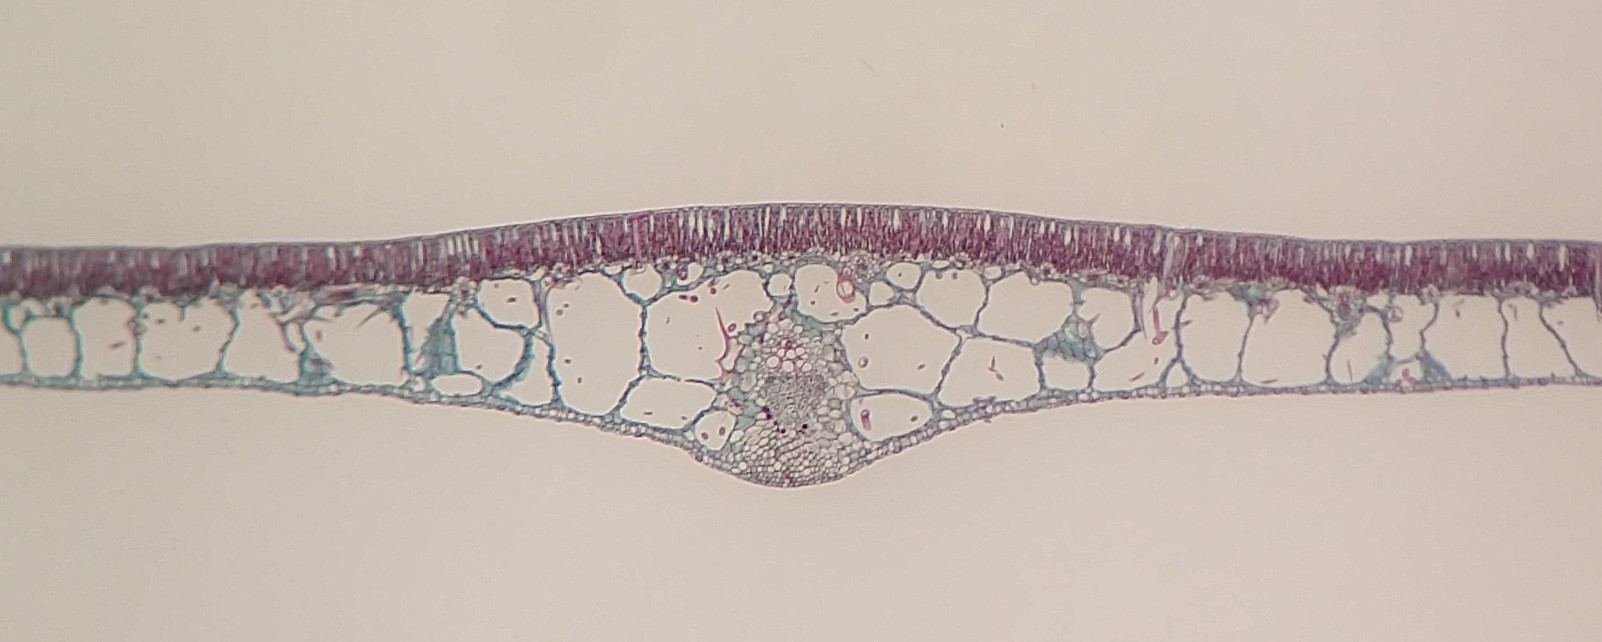 A cross section through a water lily (Nymphaea) leaf